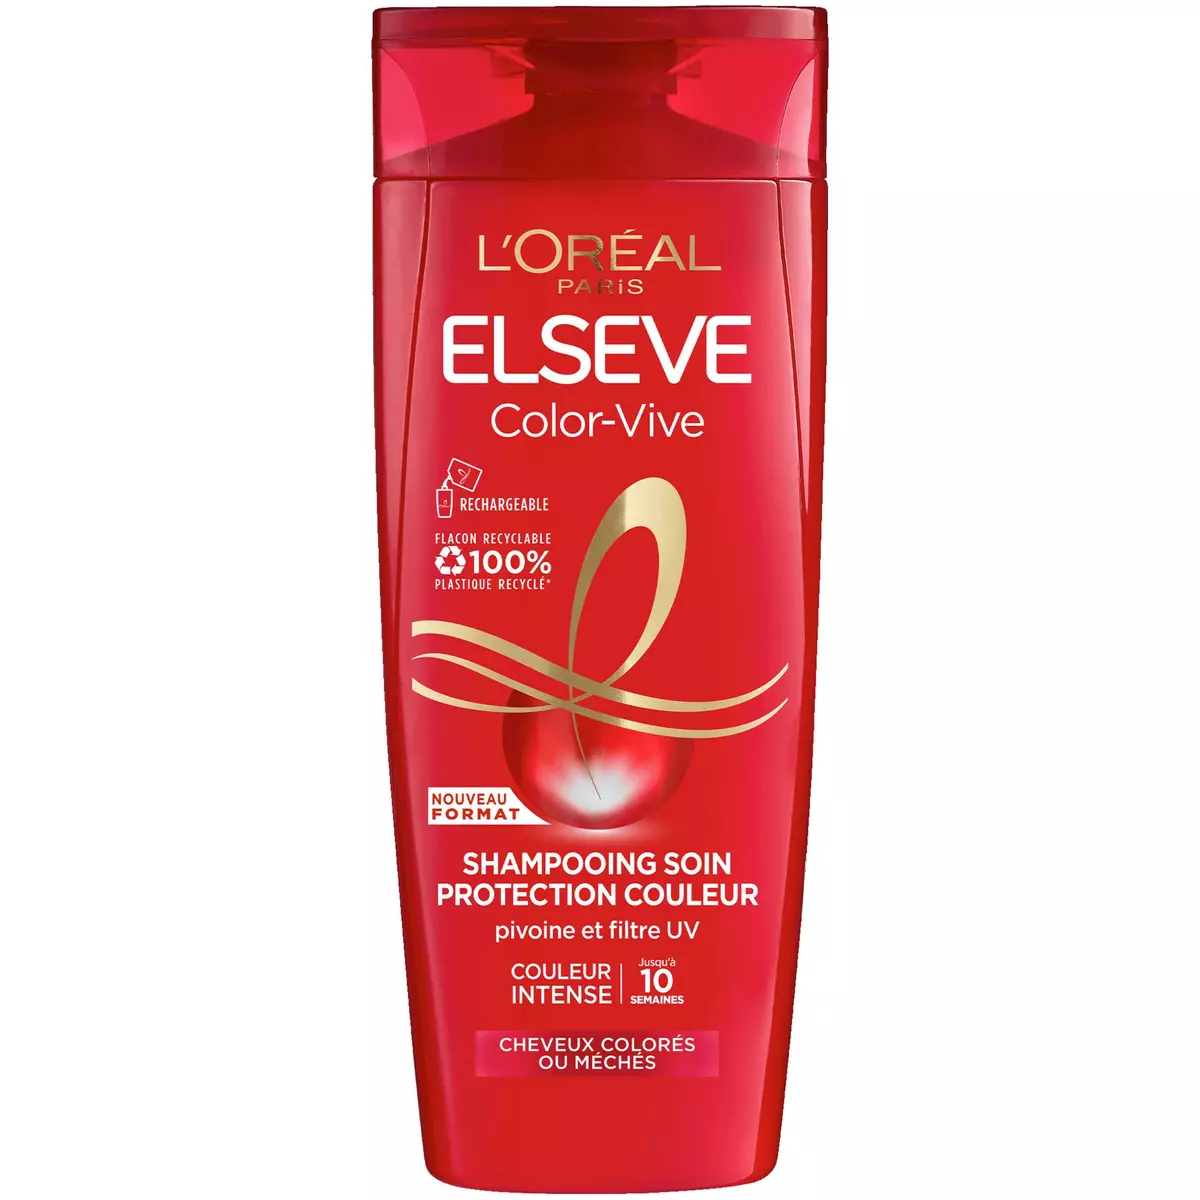 ELSEVE Color Vive Shampooing soin protection couleur 350ml